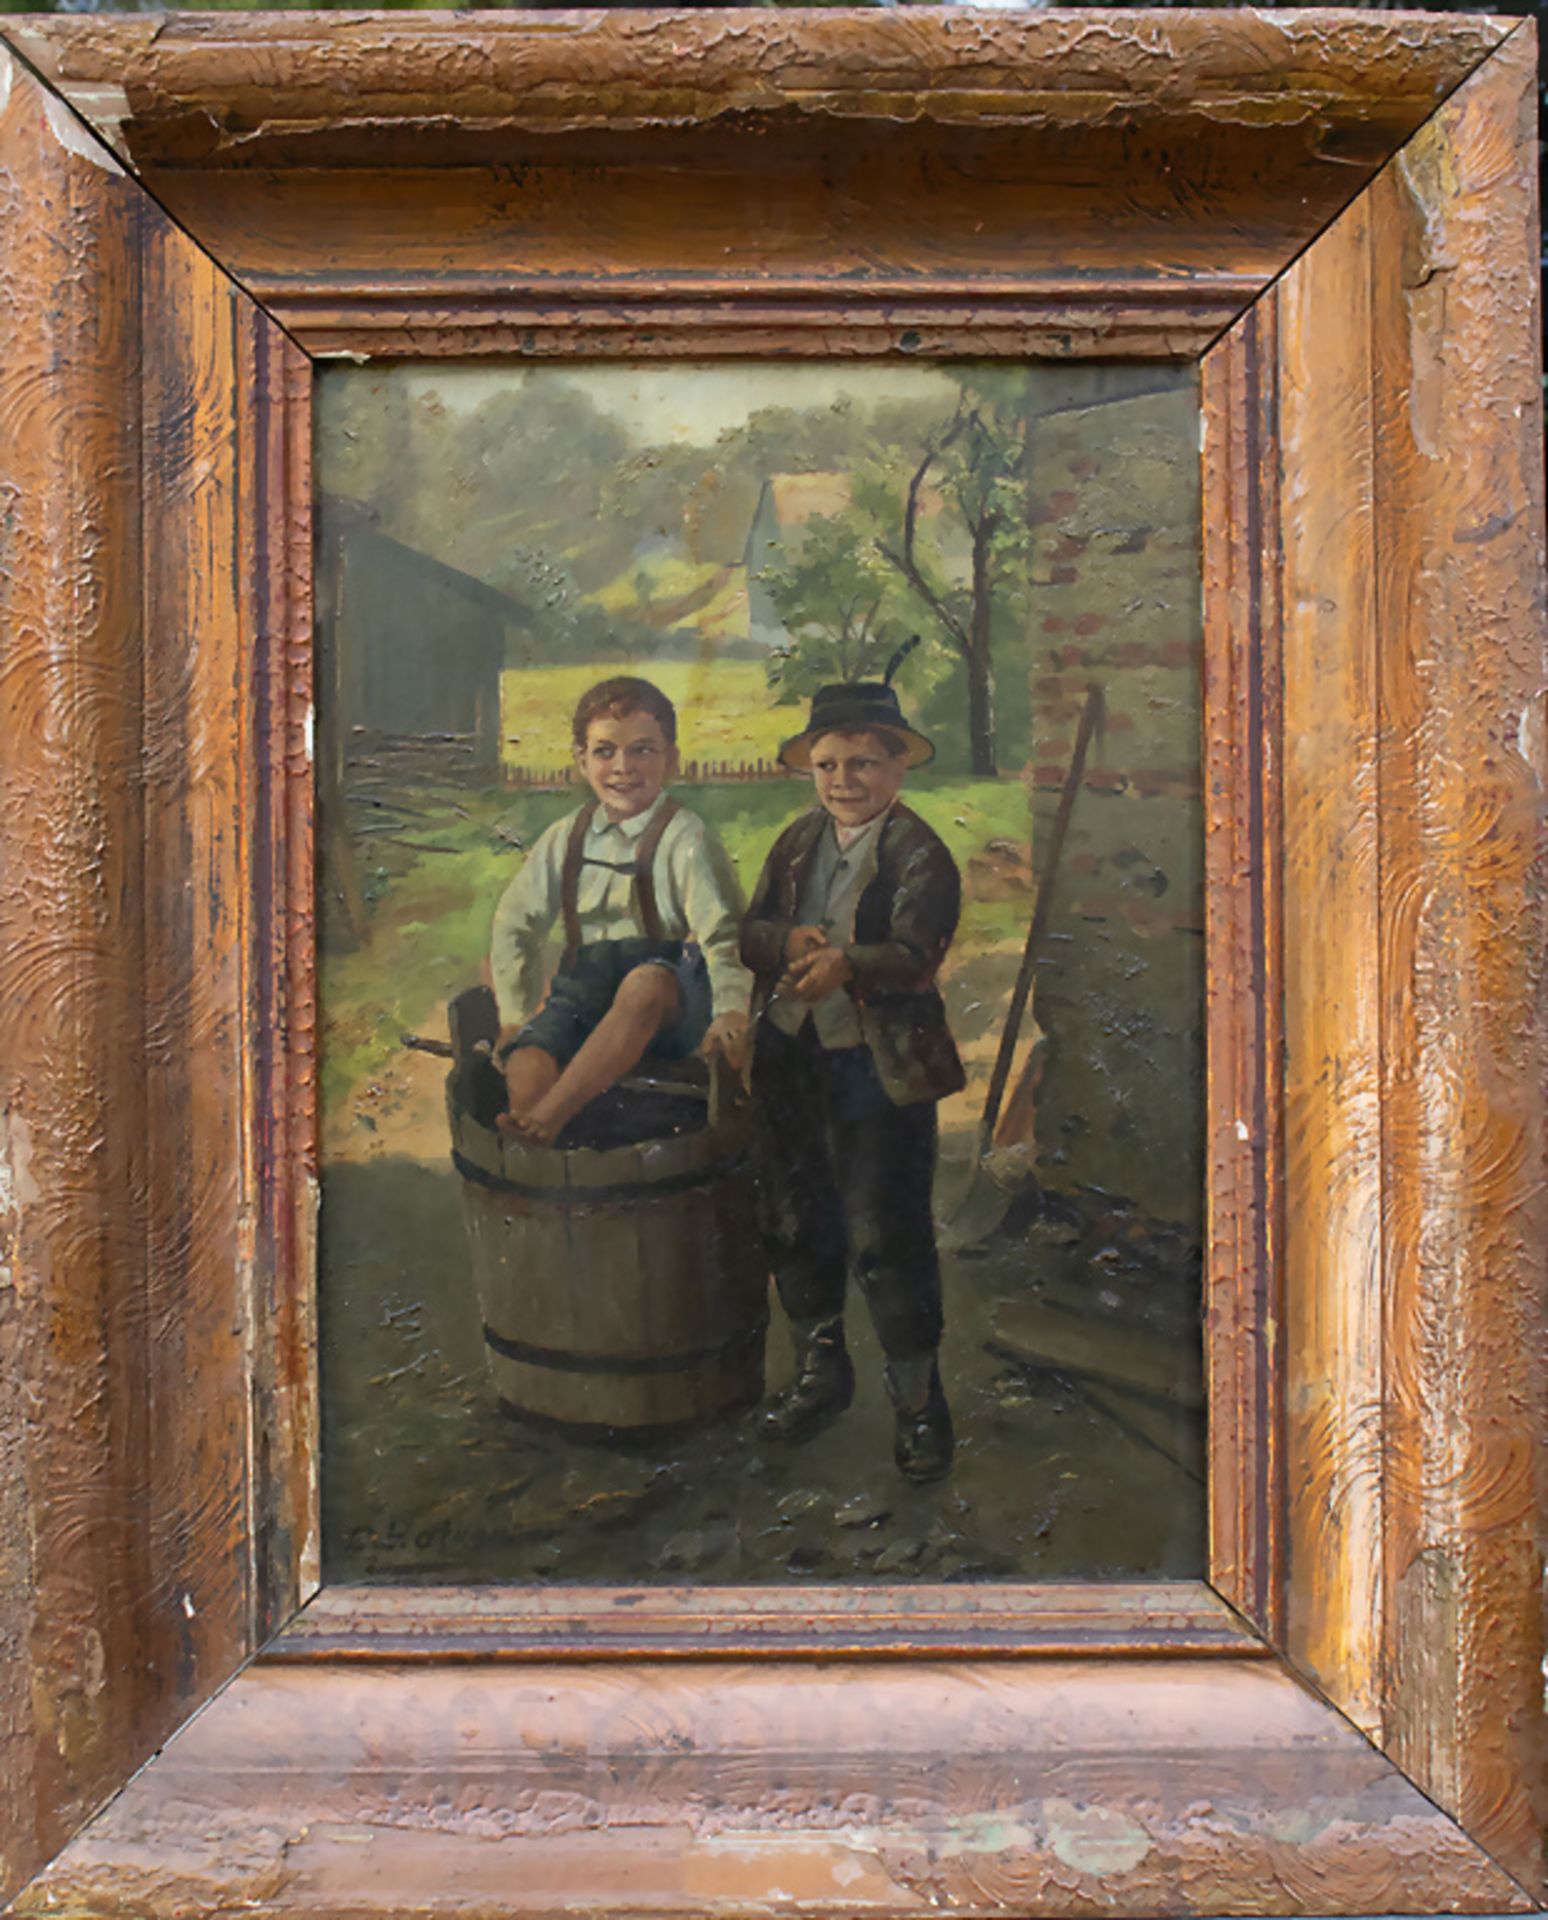 Georg HACKER (1863-1945), 'Lausbuben bei der Abkühlung' / 'Two scallywags cooling off', um 1910 - Image 2 of 5